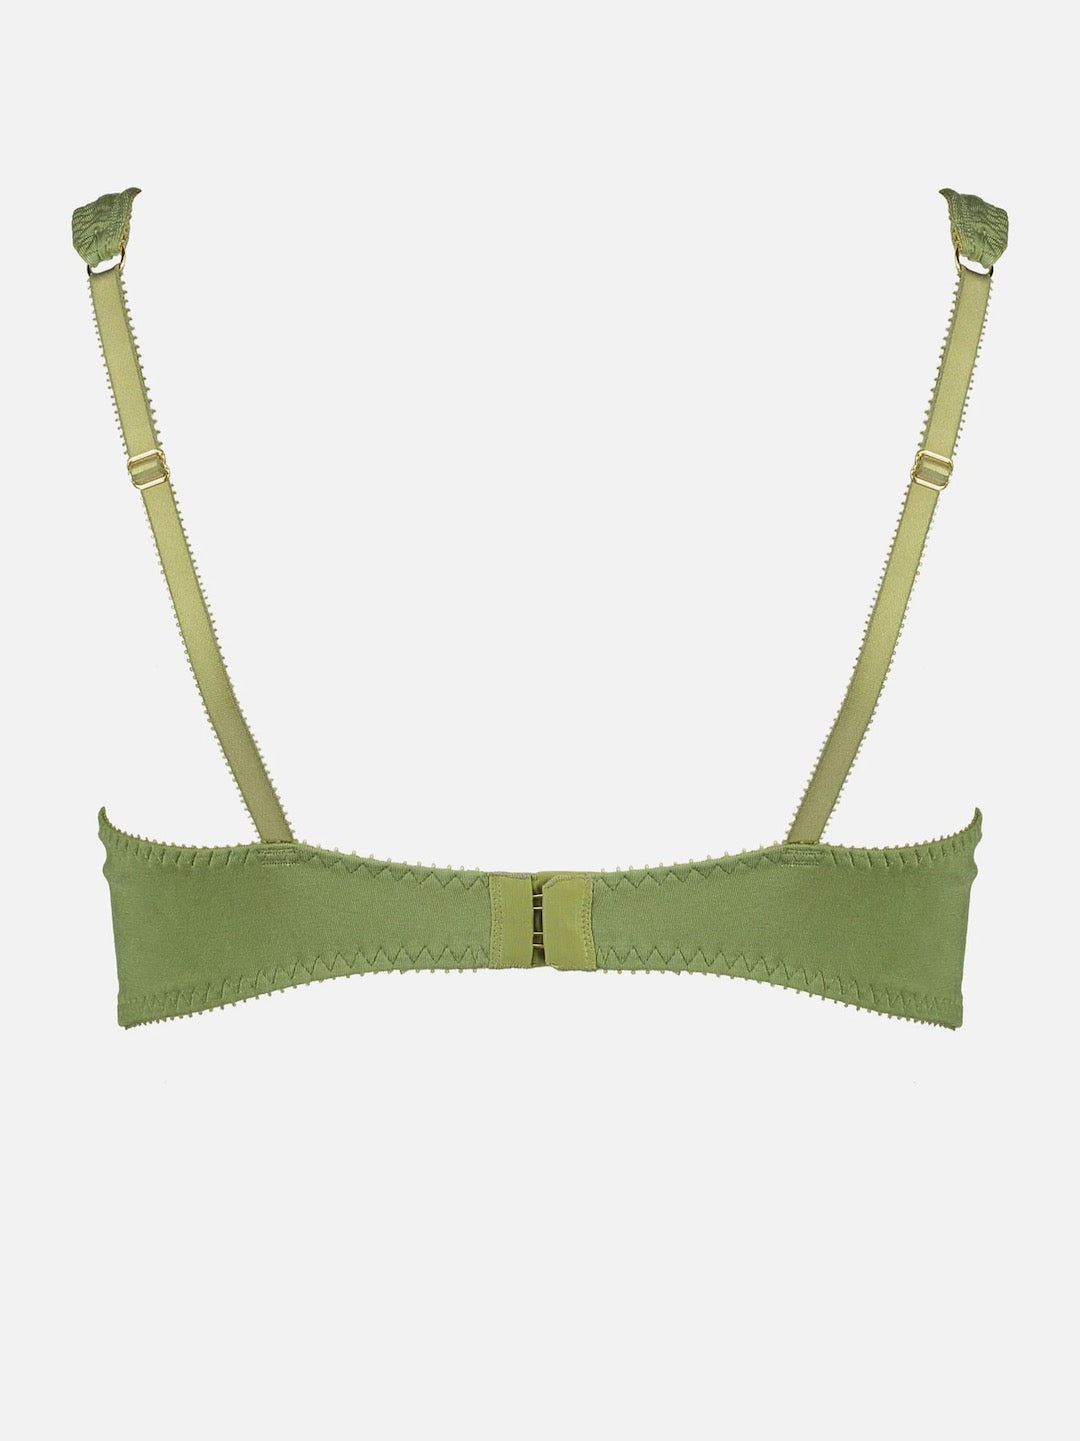 A Sarah Bra - Olive with straps on a white background.